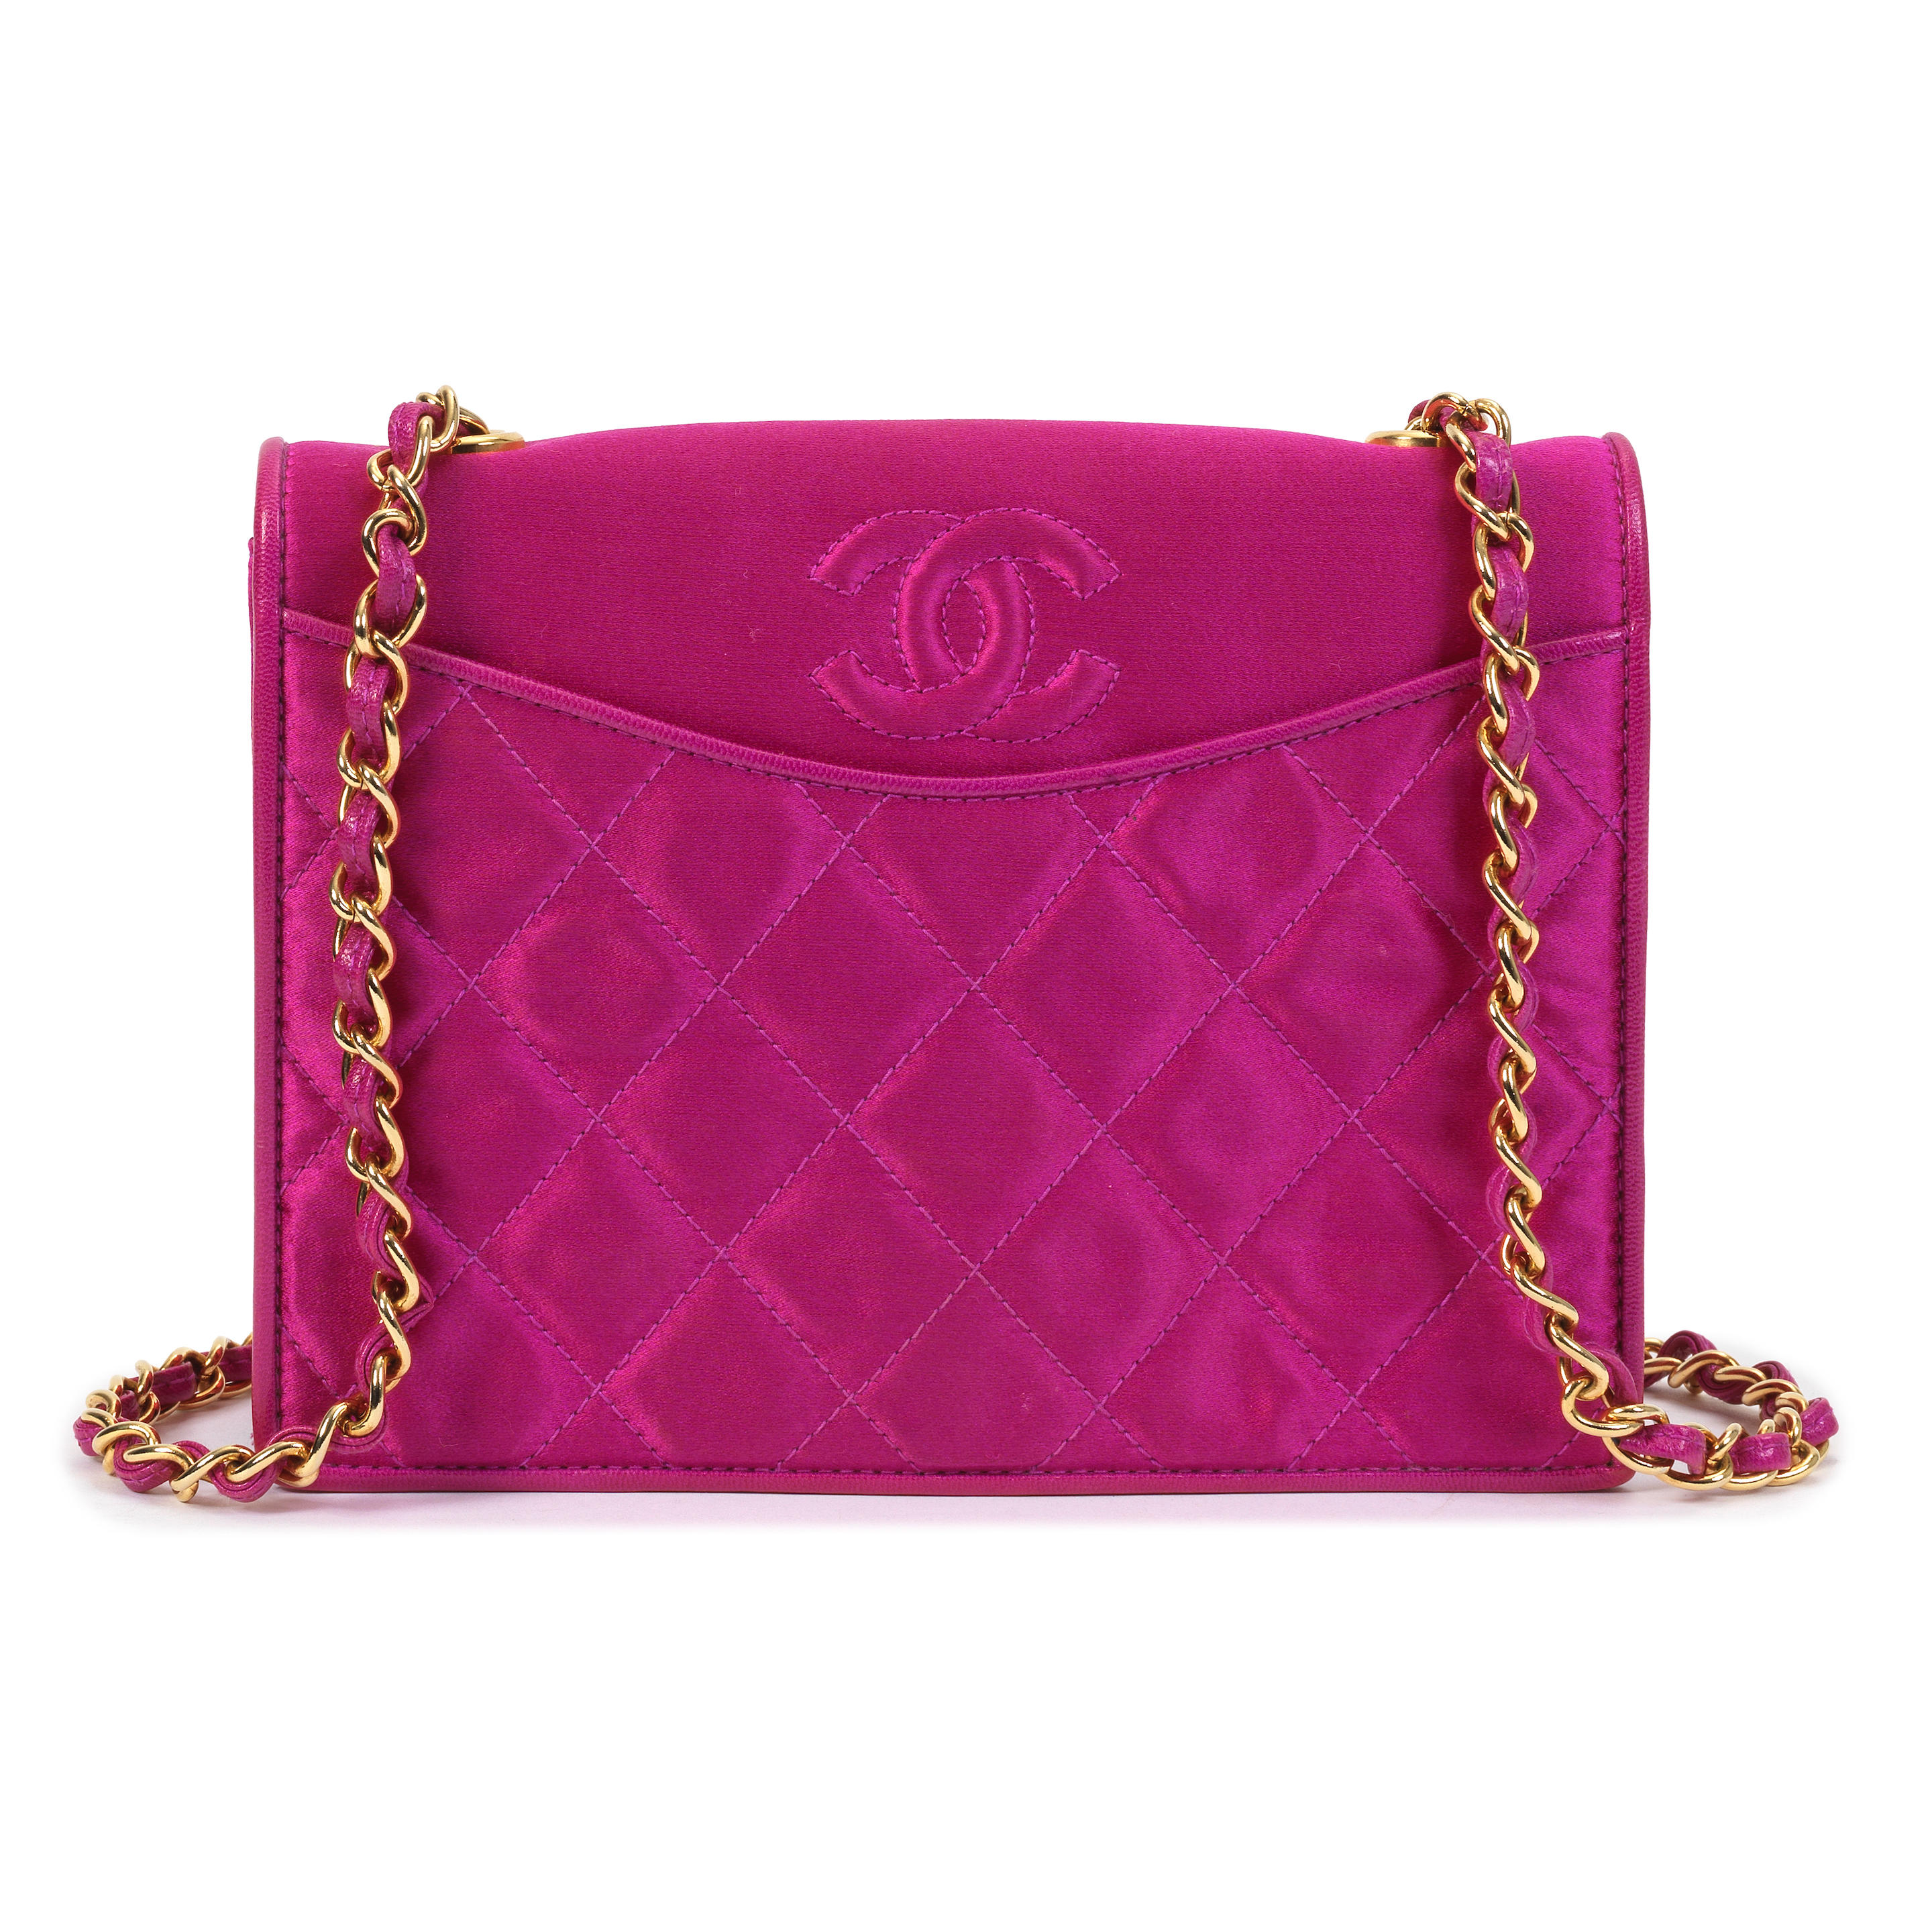 Bonhams : Karl Lagerfeld for Chanel a Hot Pink Satin CC Full Flap Bag  1989-91 (includes serial sticker, authenticity card and dust bag)